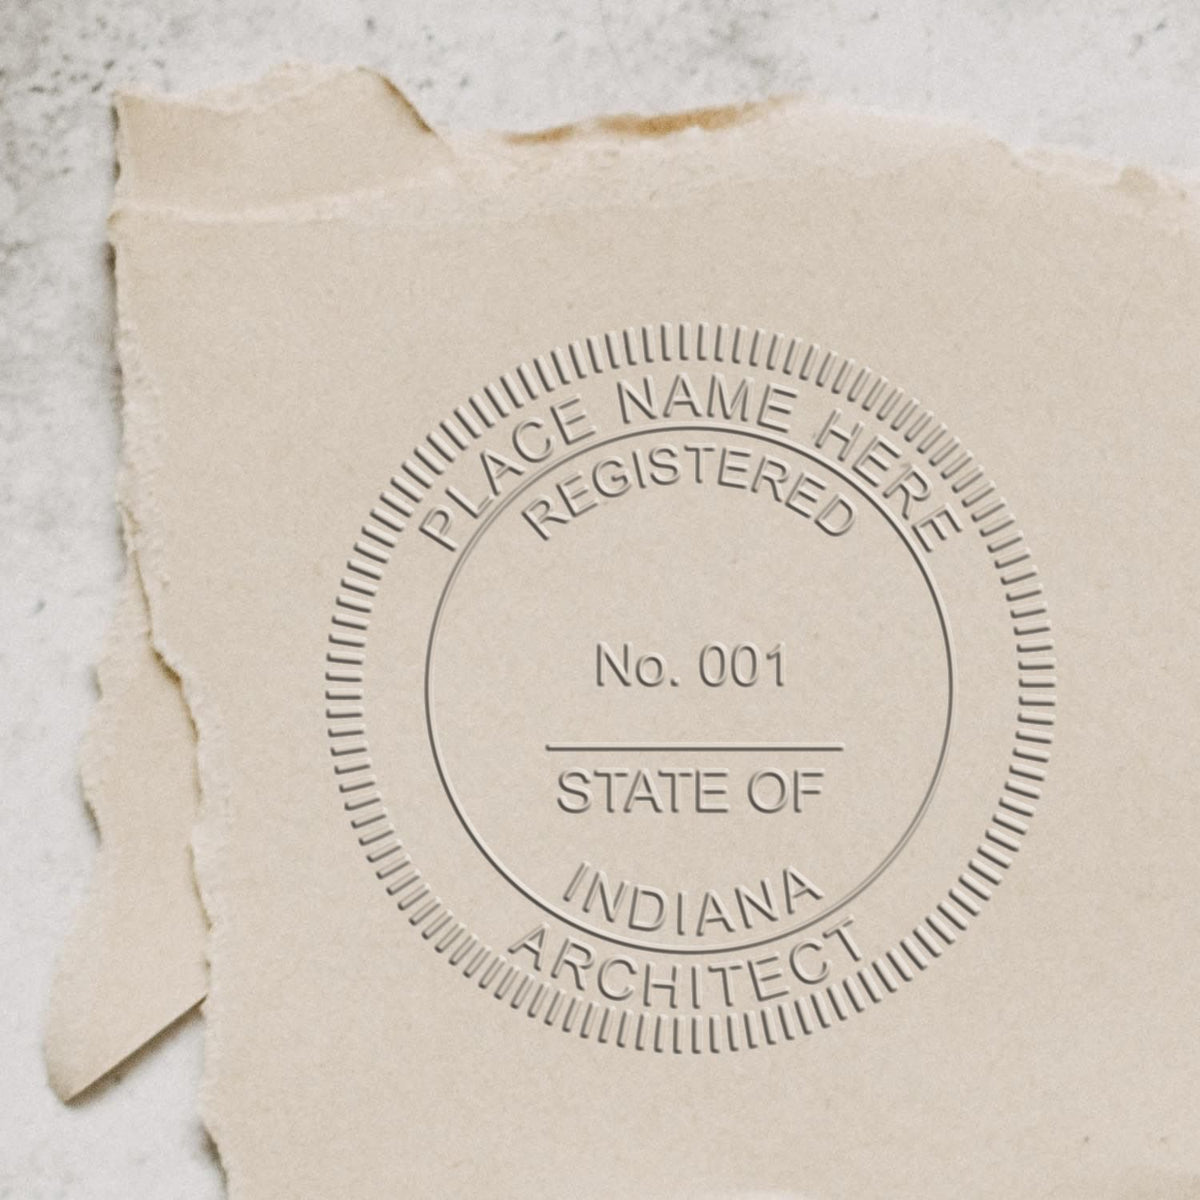 The State of Indiana Architectural Seal Embosser stamp impression comes to life with a crisp, detailed photo on paper - showcasing true professional quality.